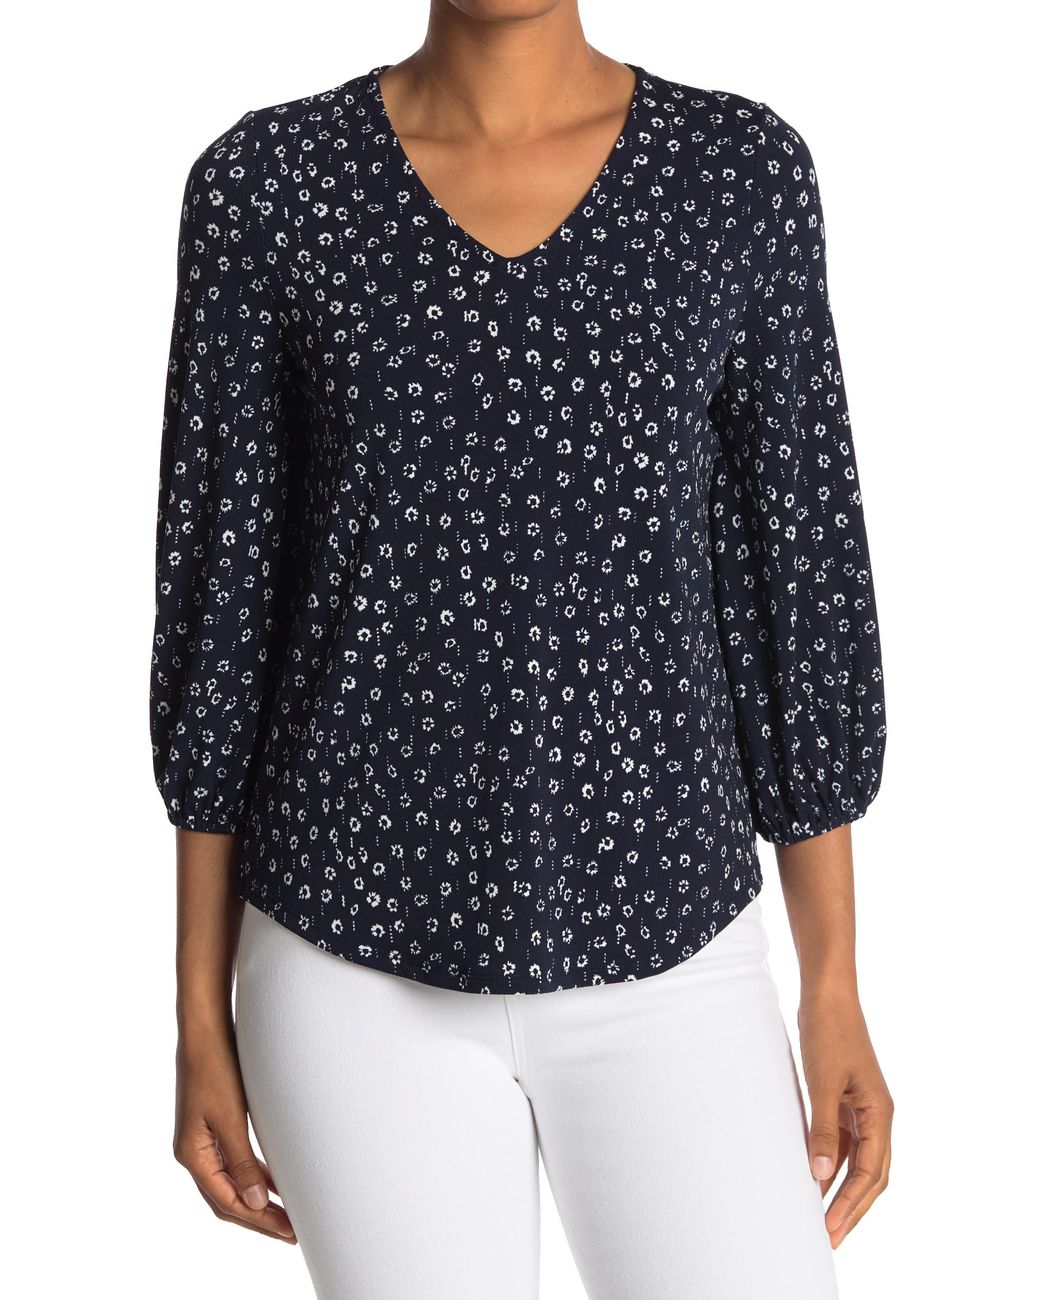 Adrianna Papell Polka Dot Printed Blouse in Blue - Lyst